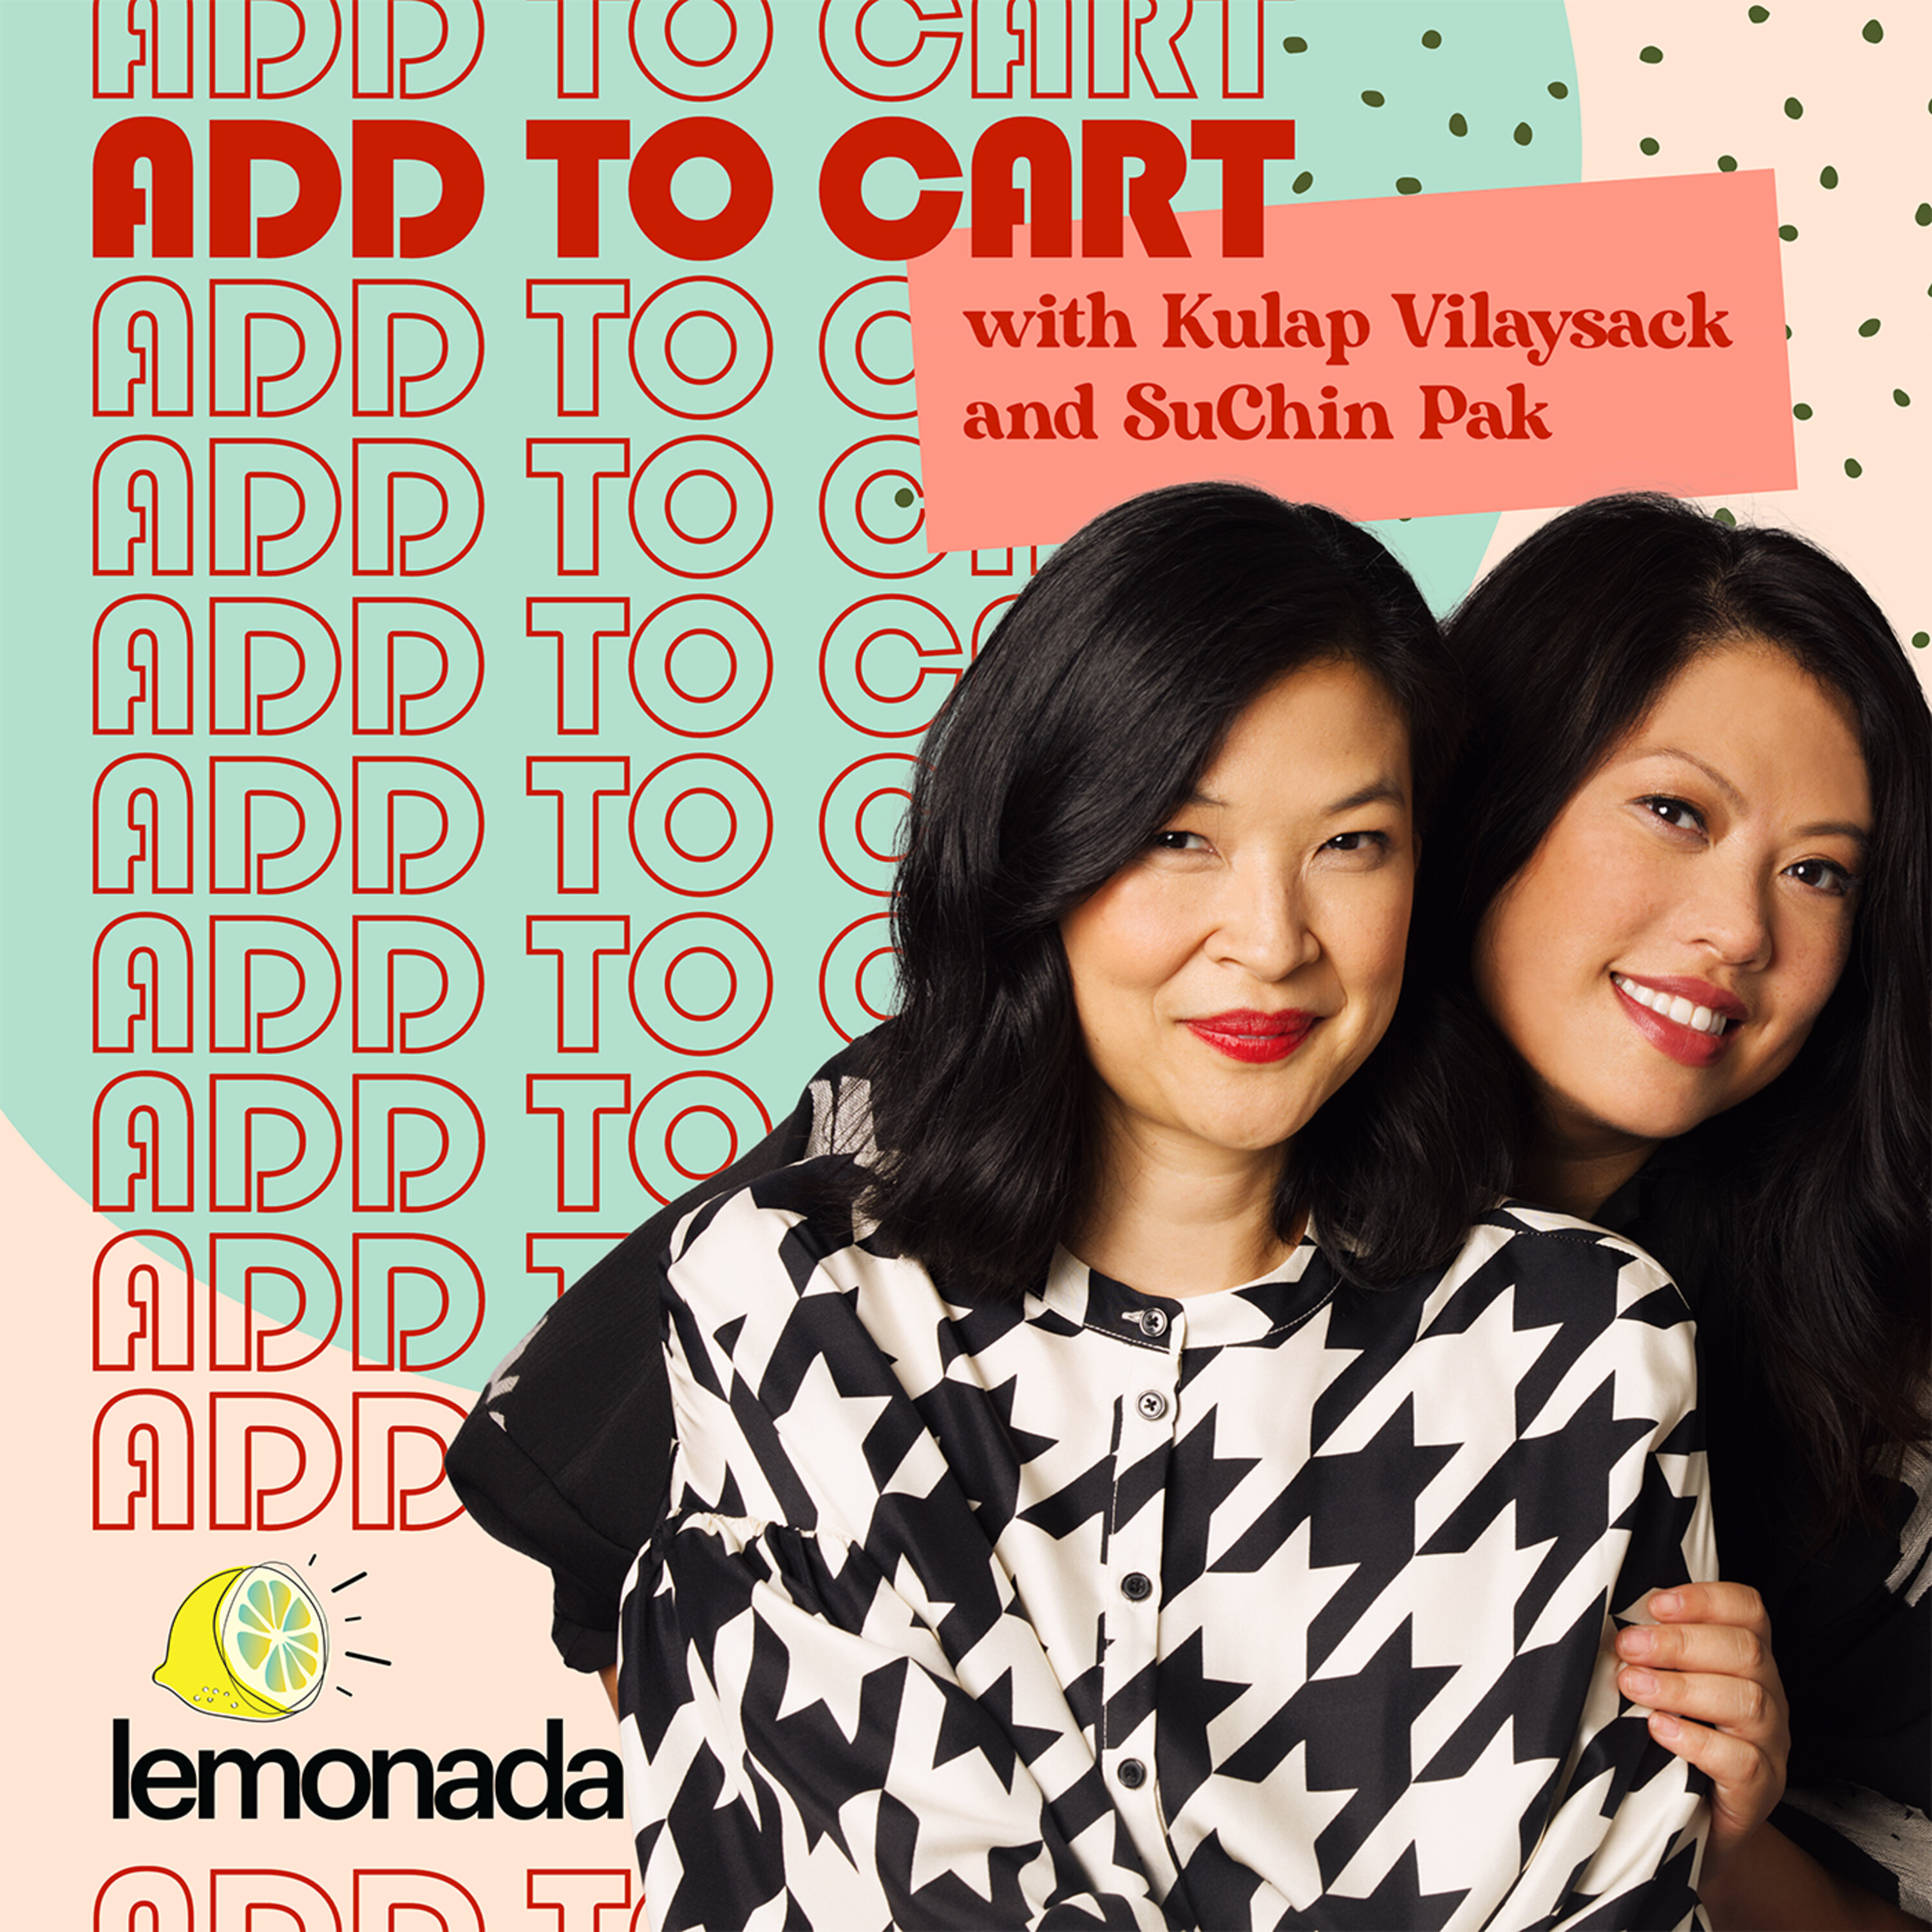 Add to Cart with Kulap Vilaysack & SuChin Pak podcast show image